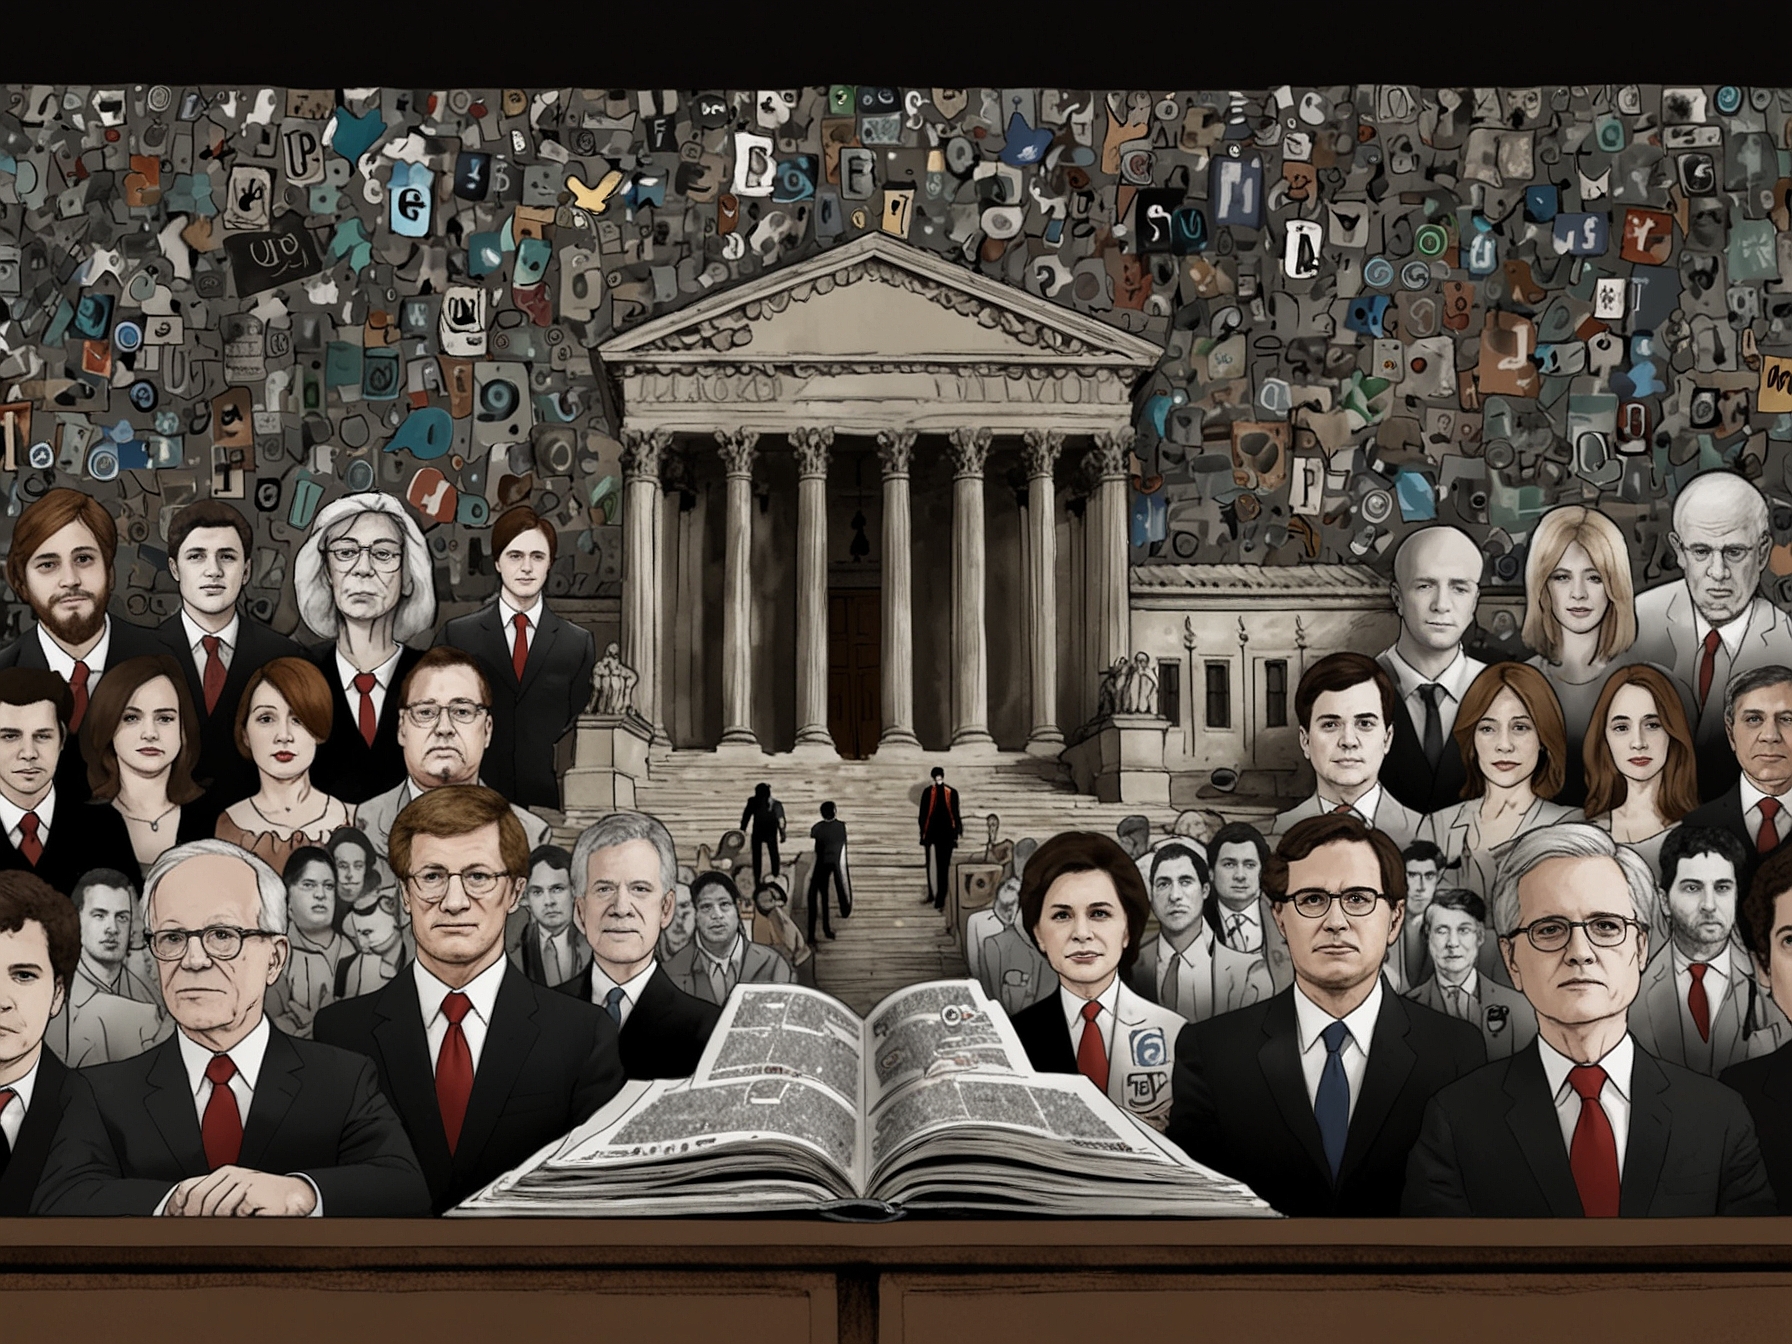 An illustration showing social media icons, emphasizing the impact of the Supreme Court decision on the regulation of online content and the balance between free speech and misinformation control.